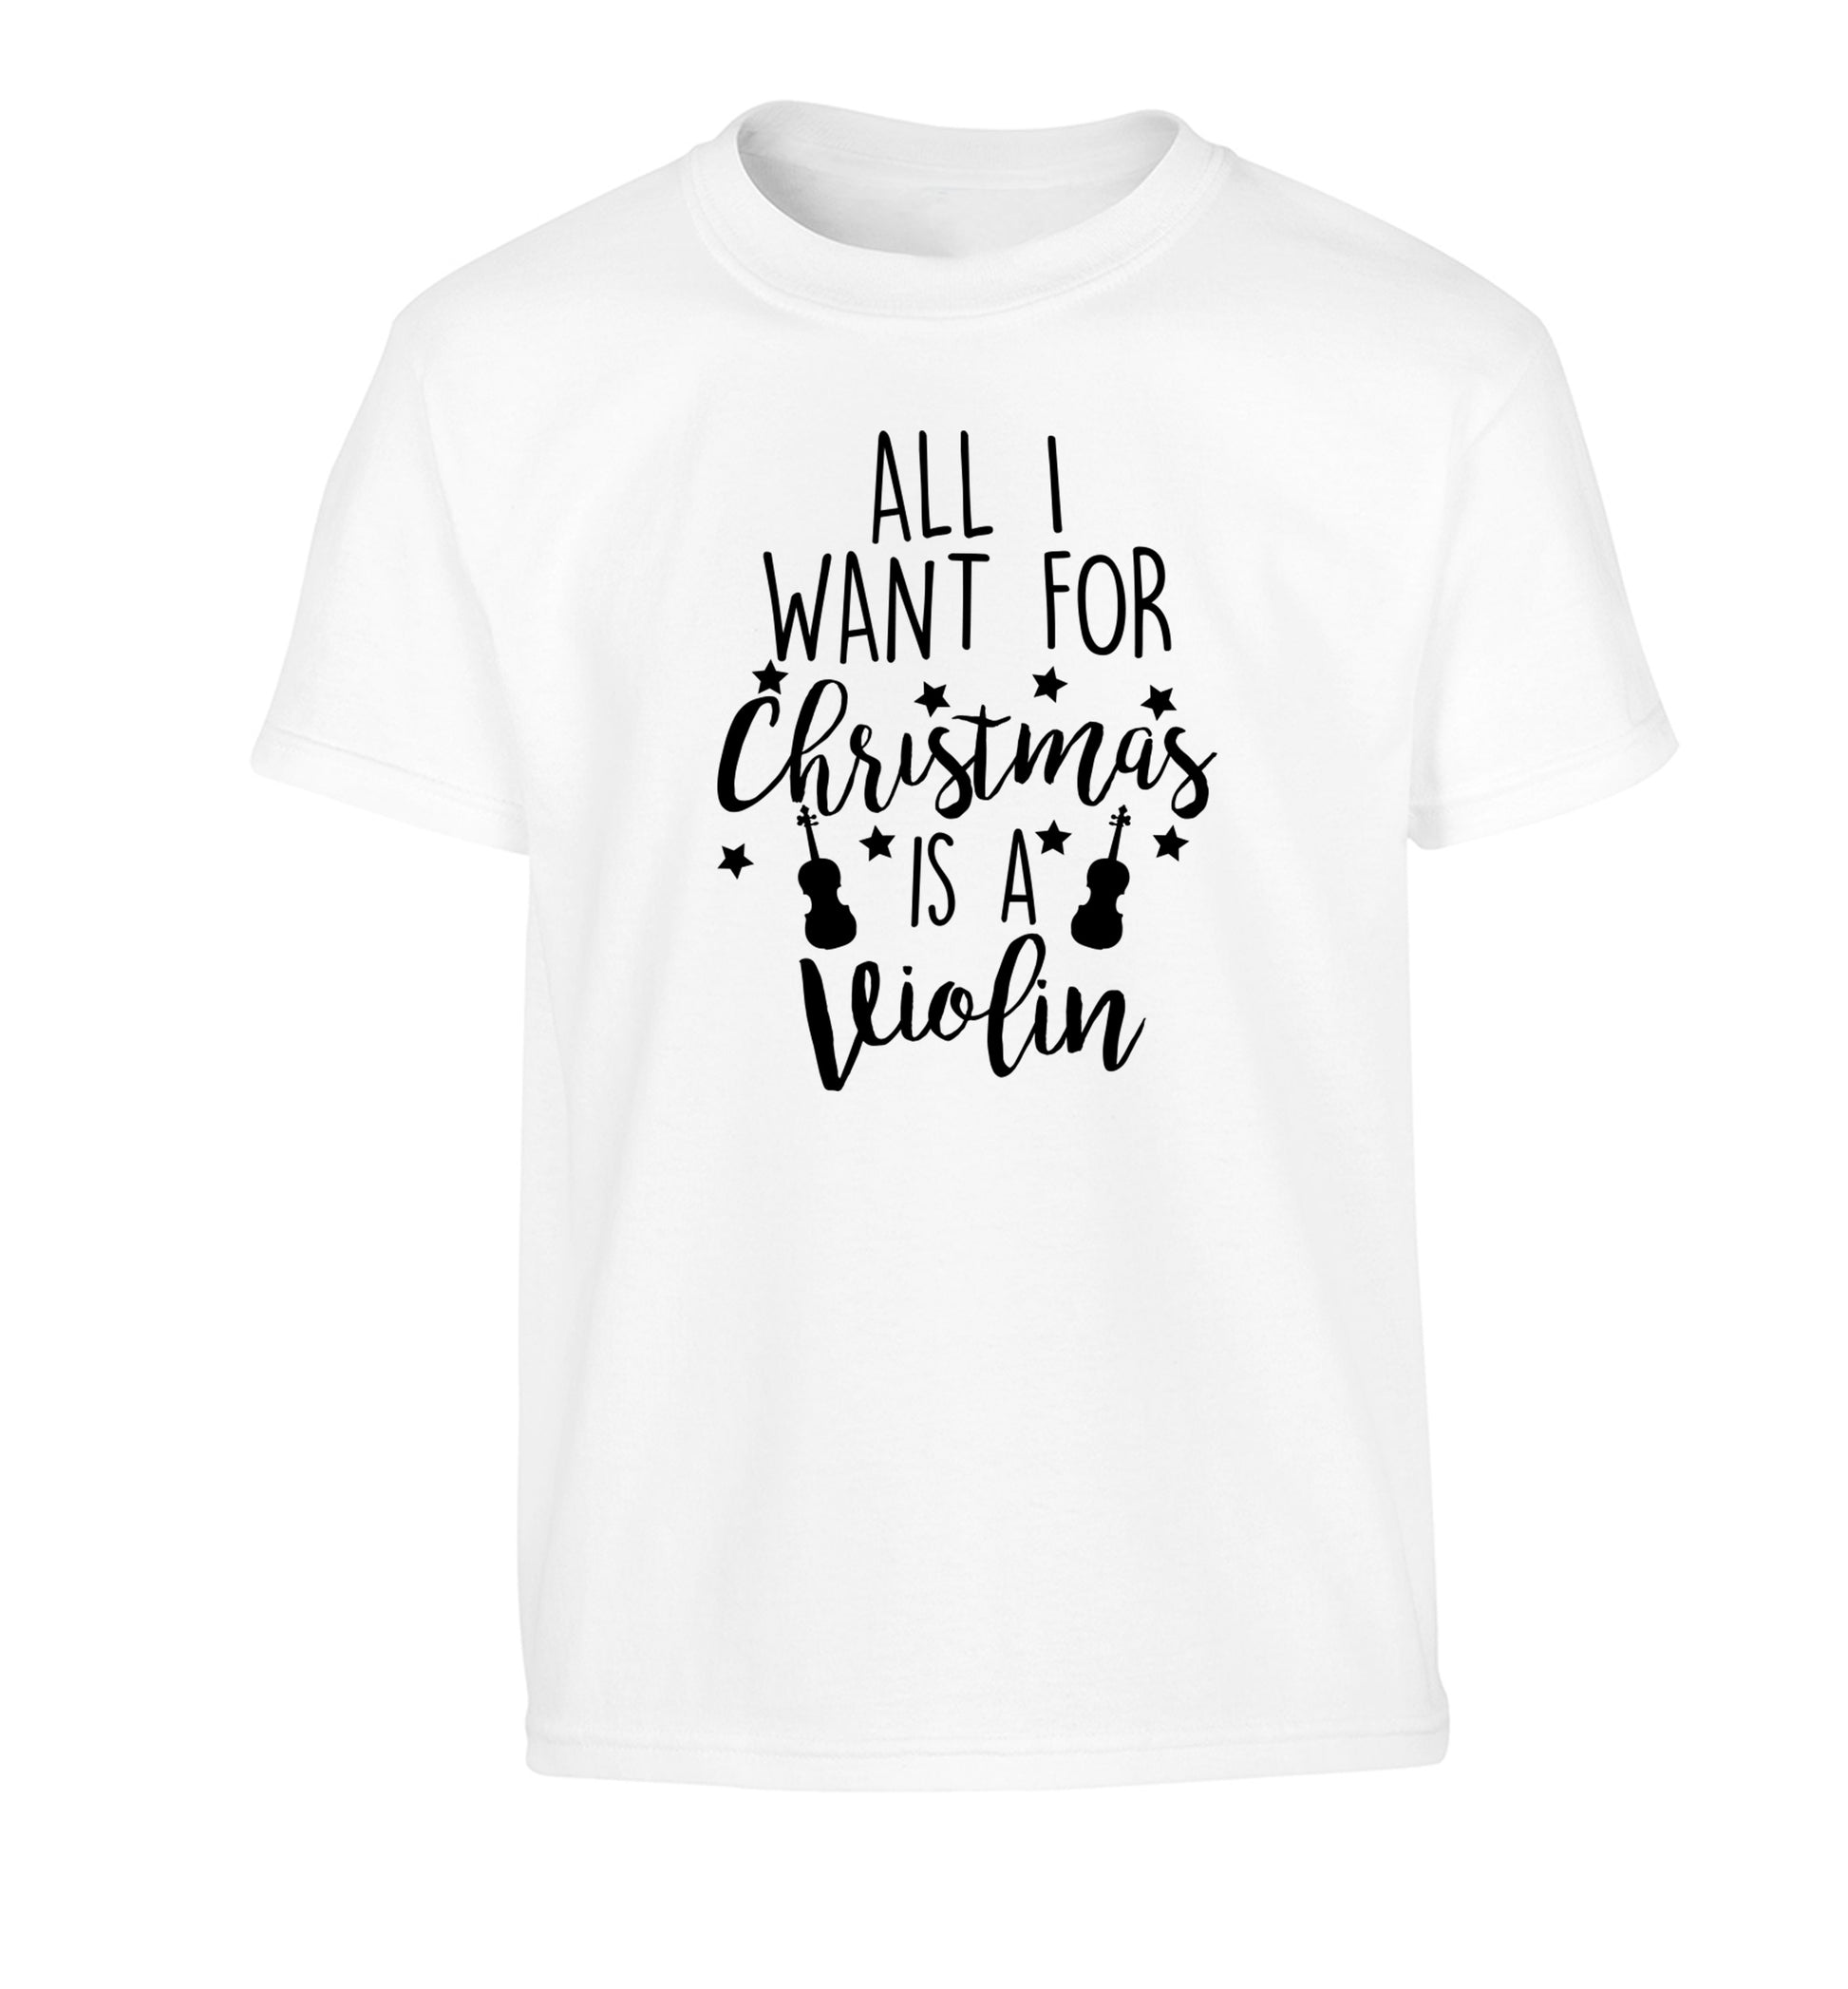 All I Want For Christmas is a Violin Children's white Tshirt 12-13 Years